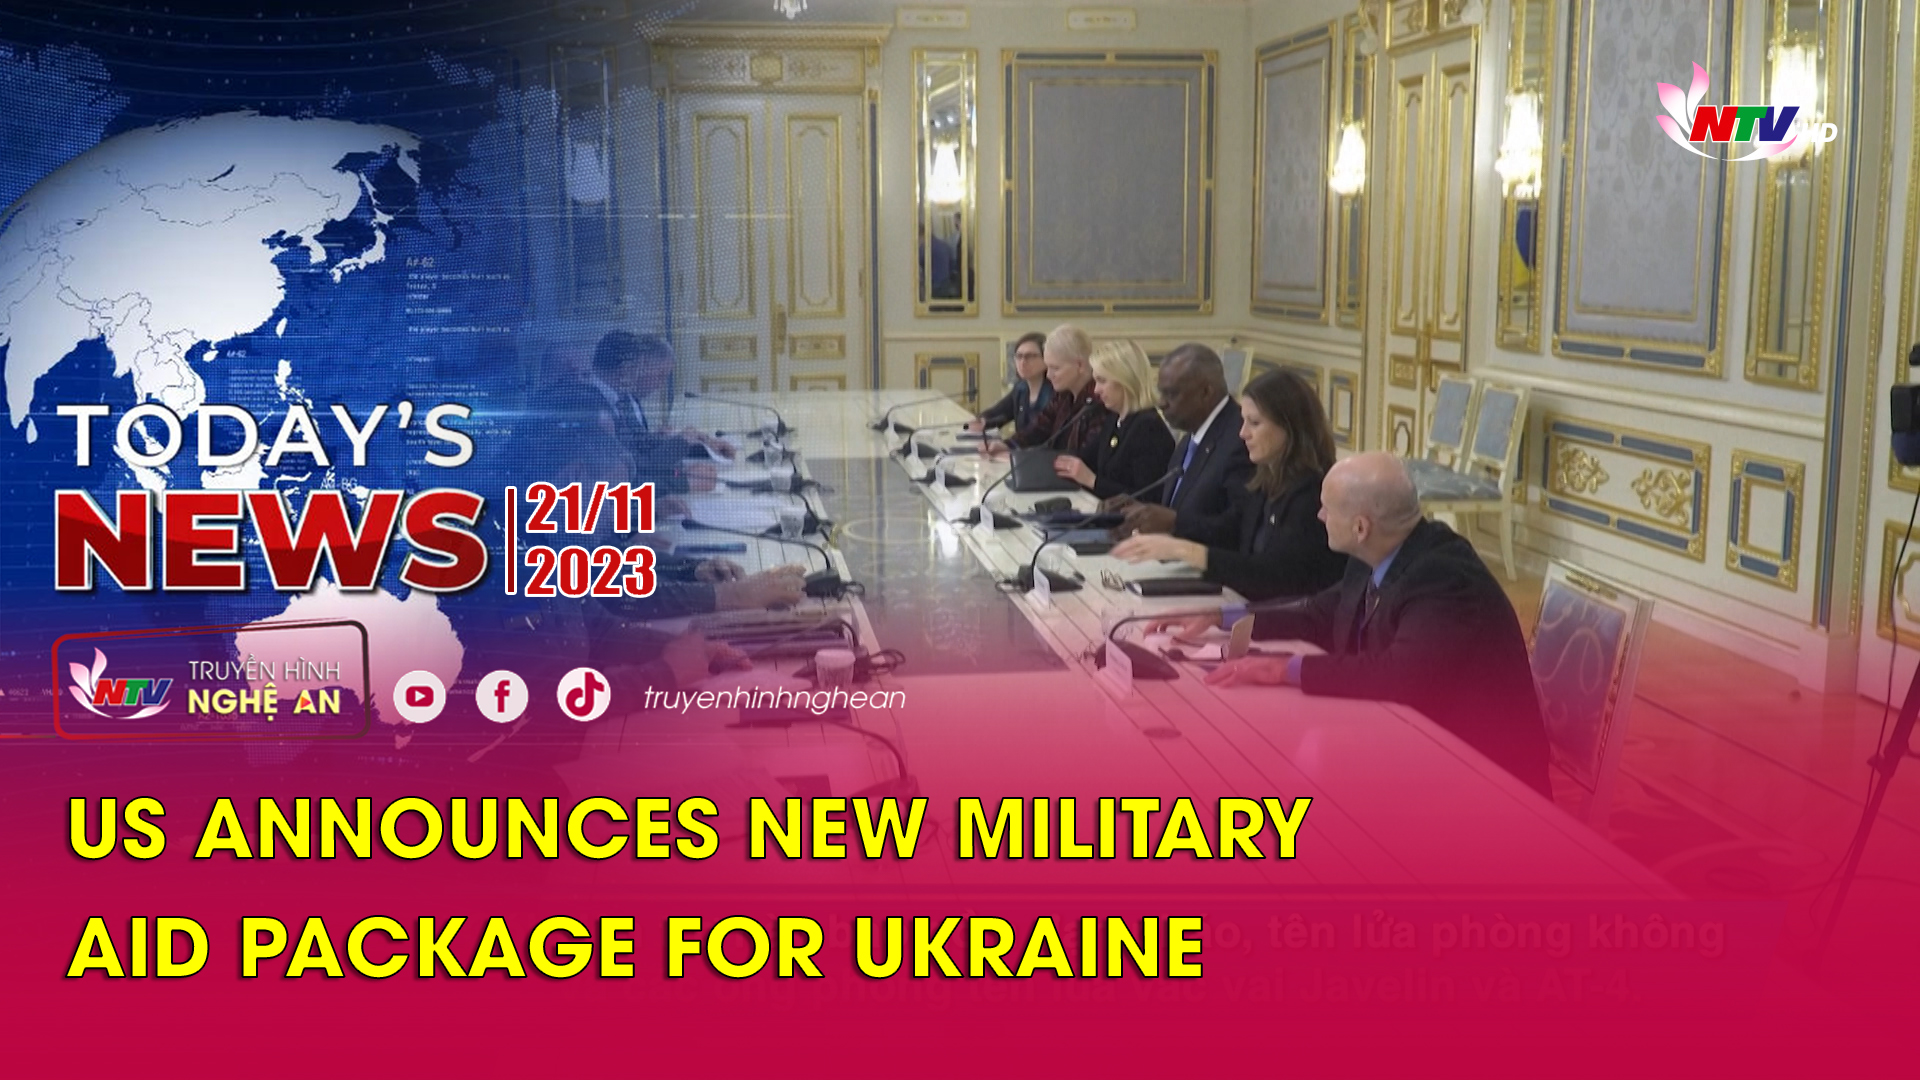 Today's News - 21/11/2023: US announces new military aid package for Ukraine